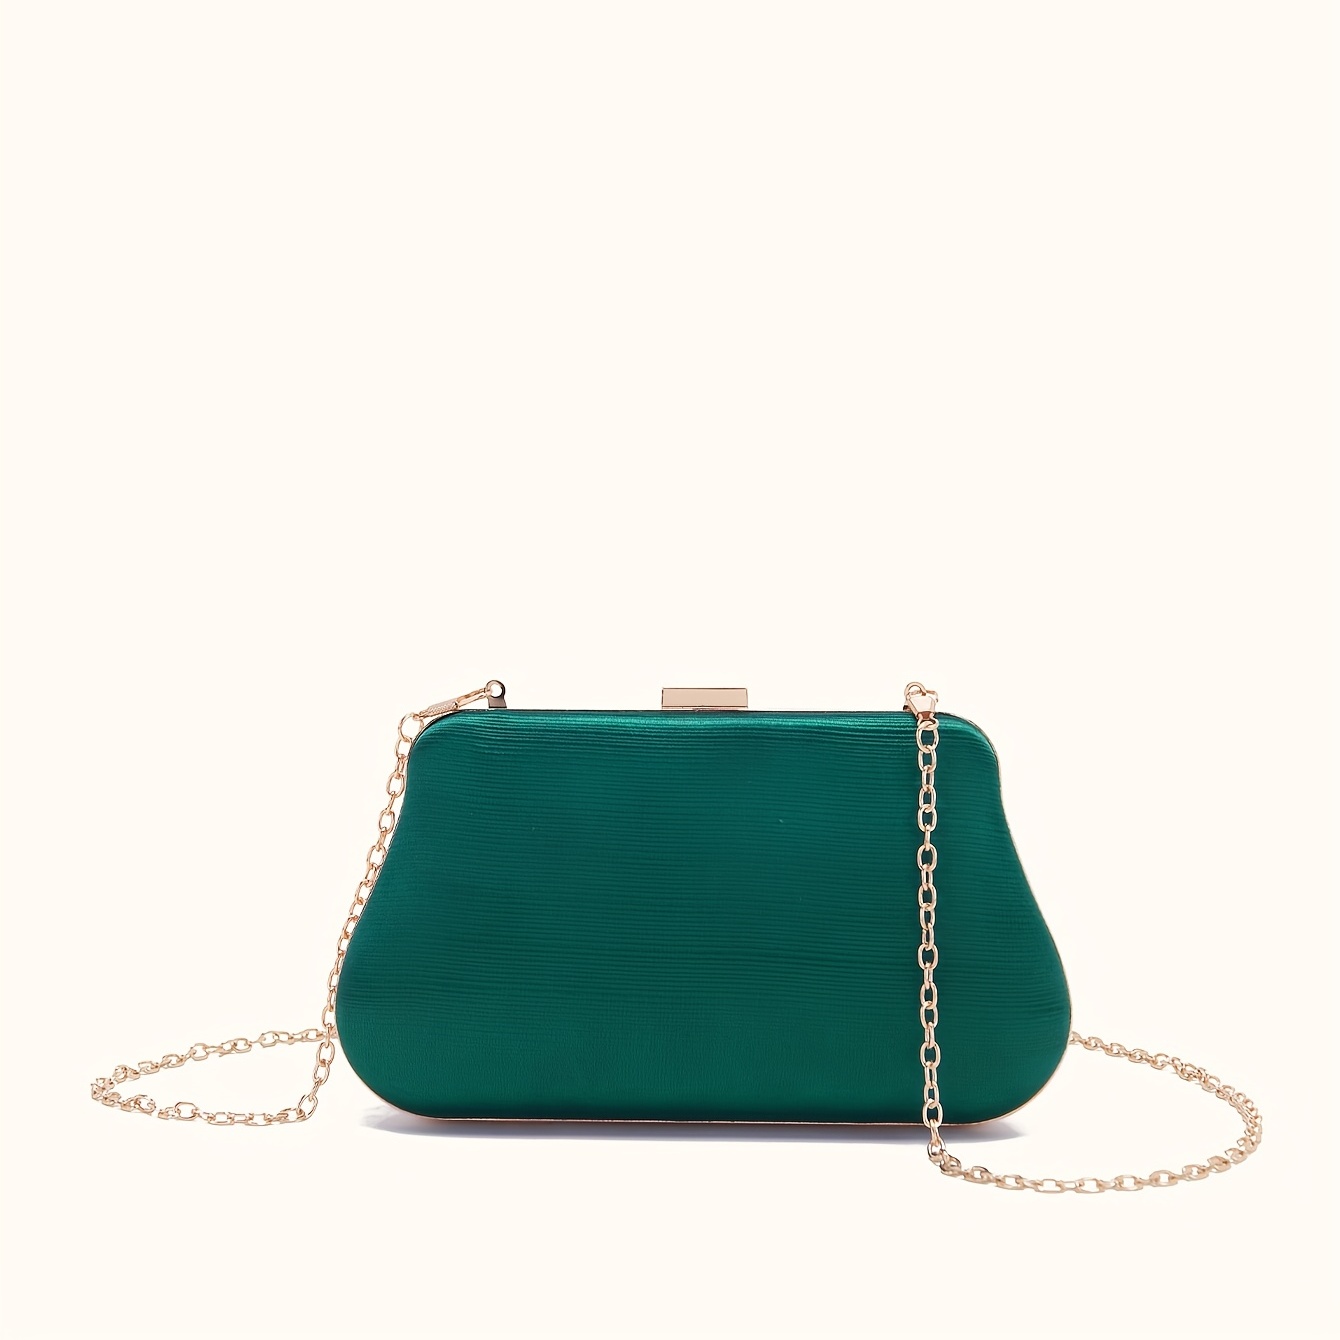 1pc Green Metallic Glossy Clutch Bag With Metal Chain Strap